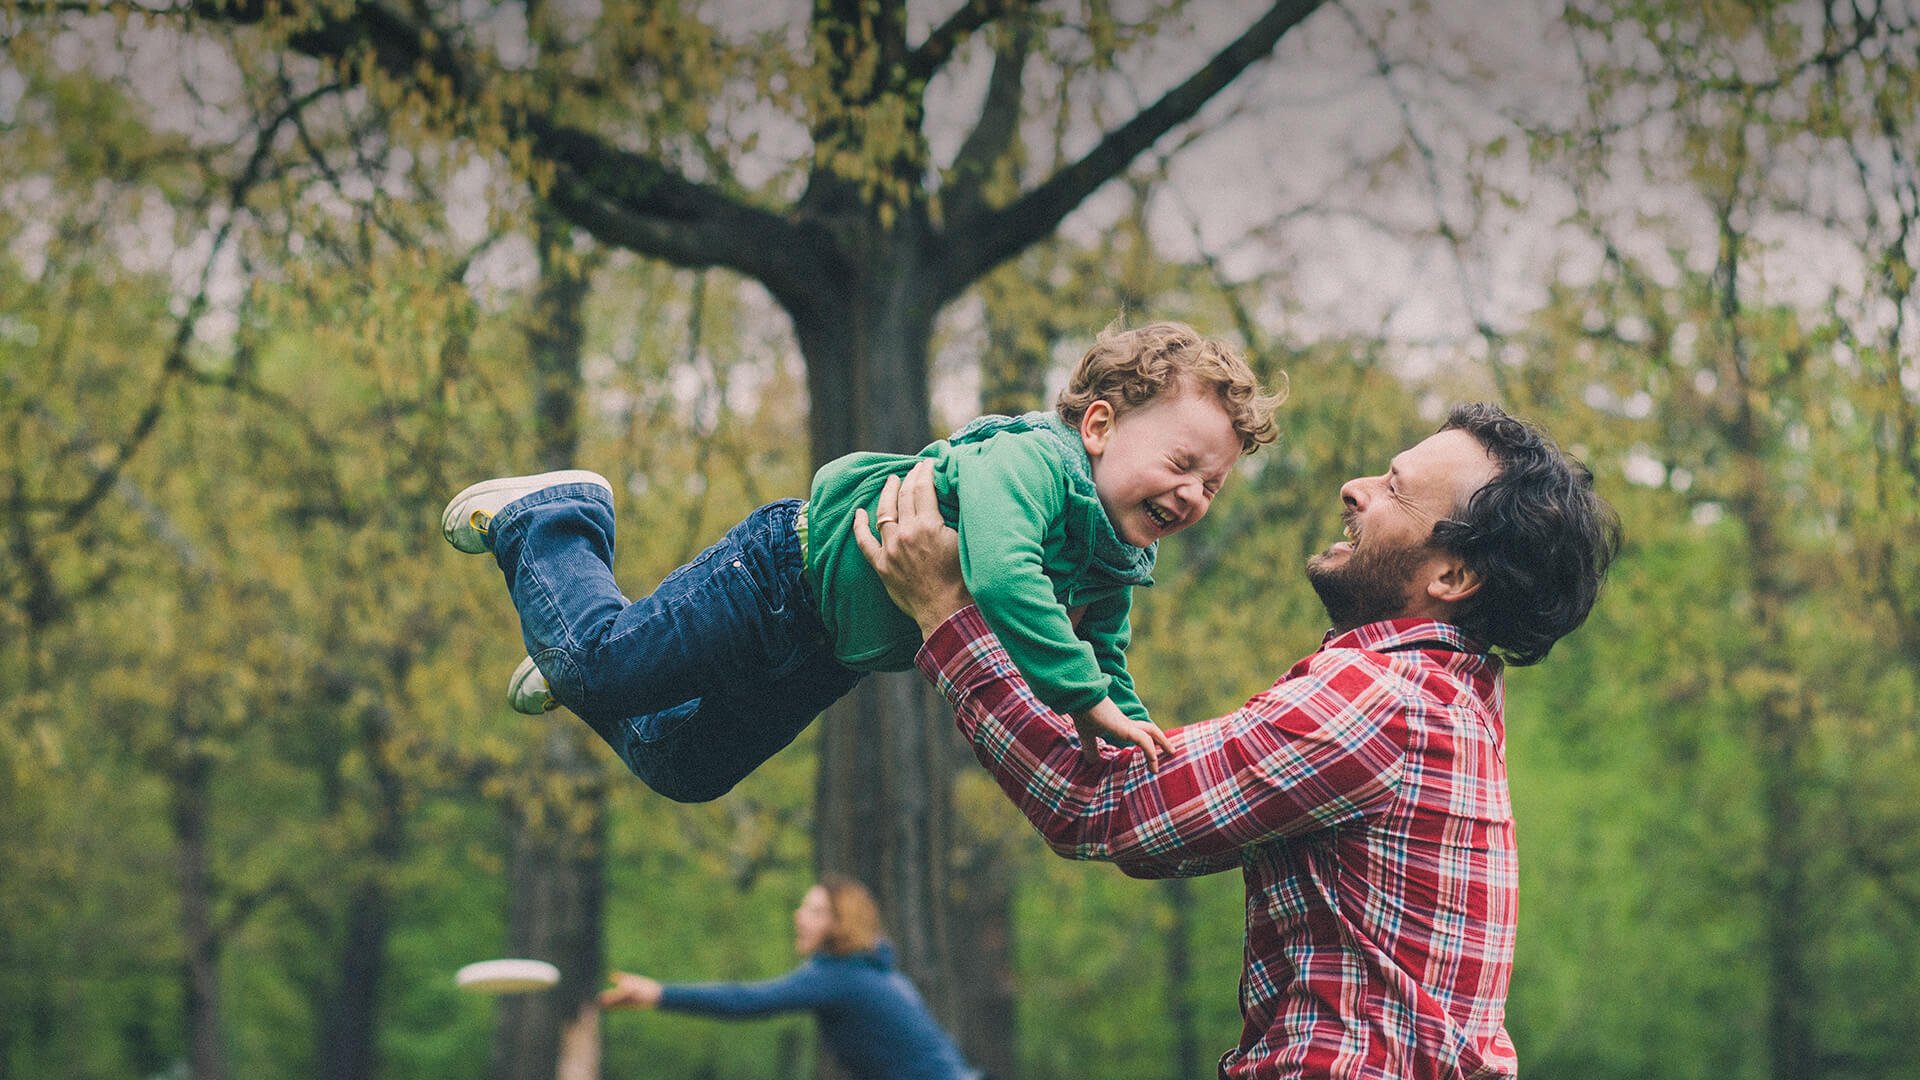 Single parents dating symbolized by a single dad who is tossing his little son in the air on a playground